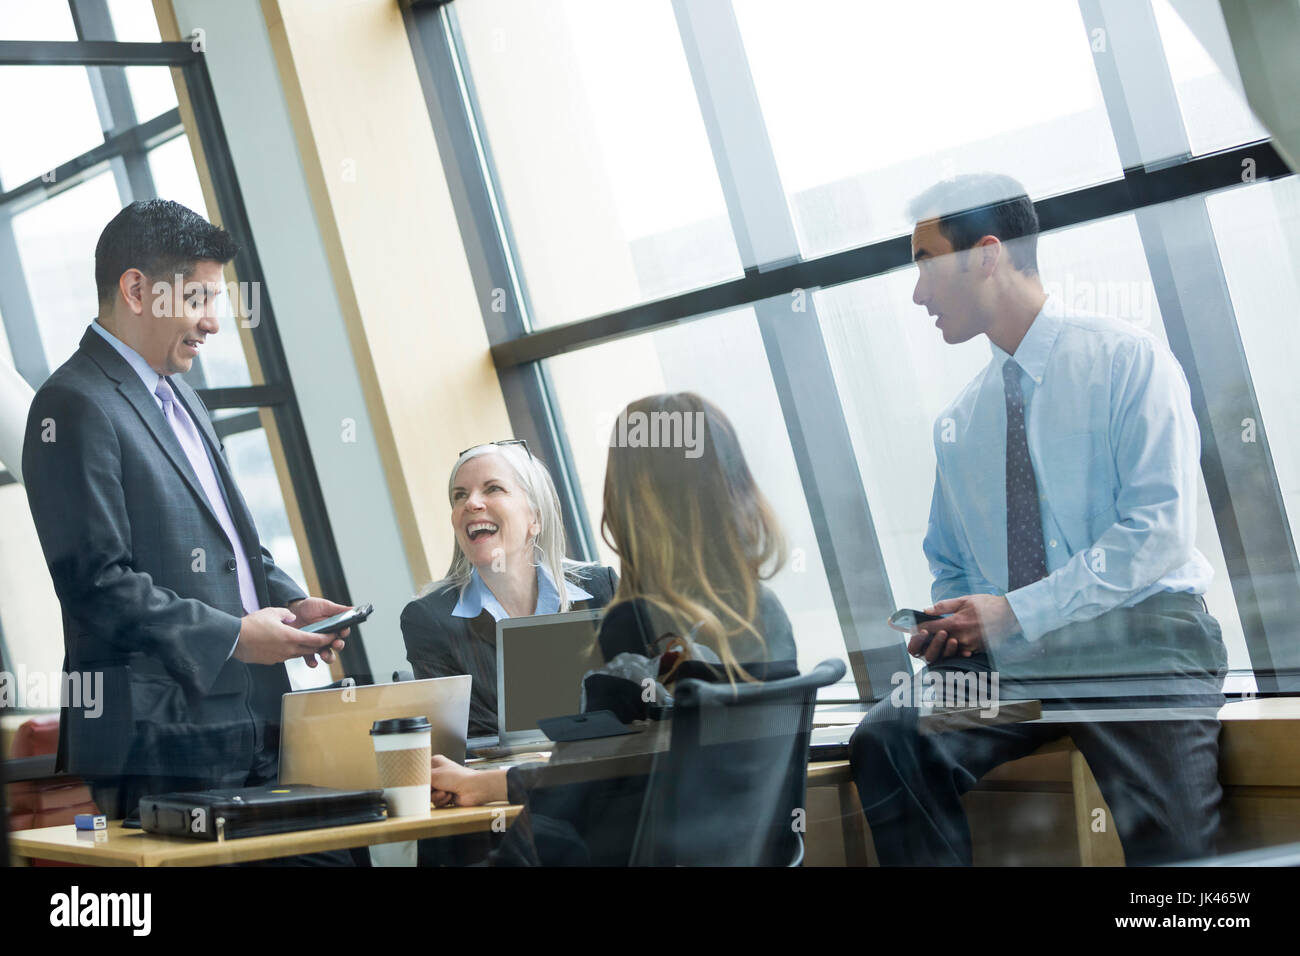 Business people laughing in meeting Stock Photo